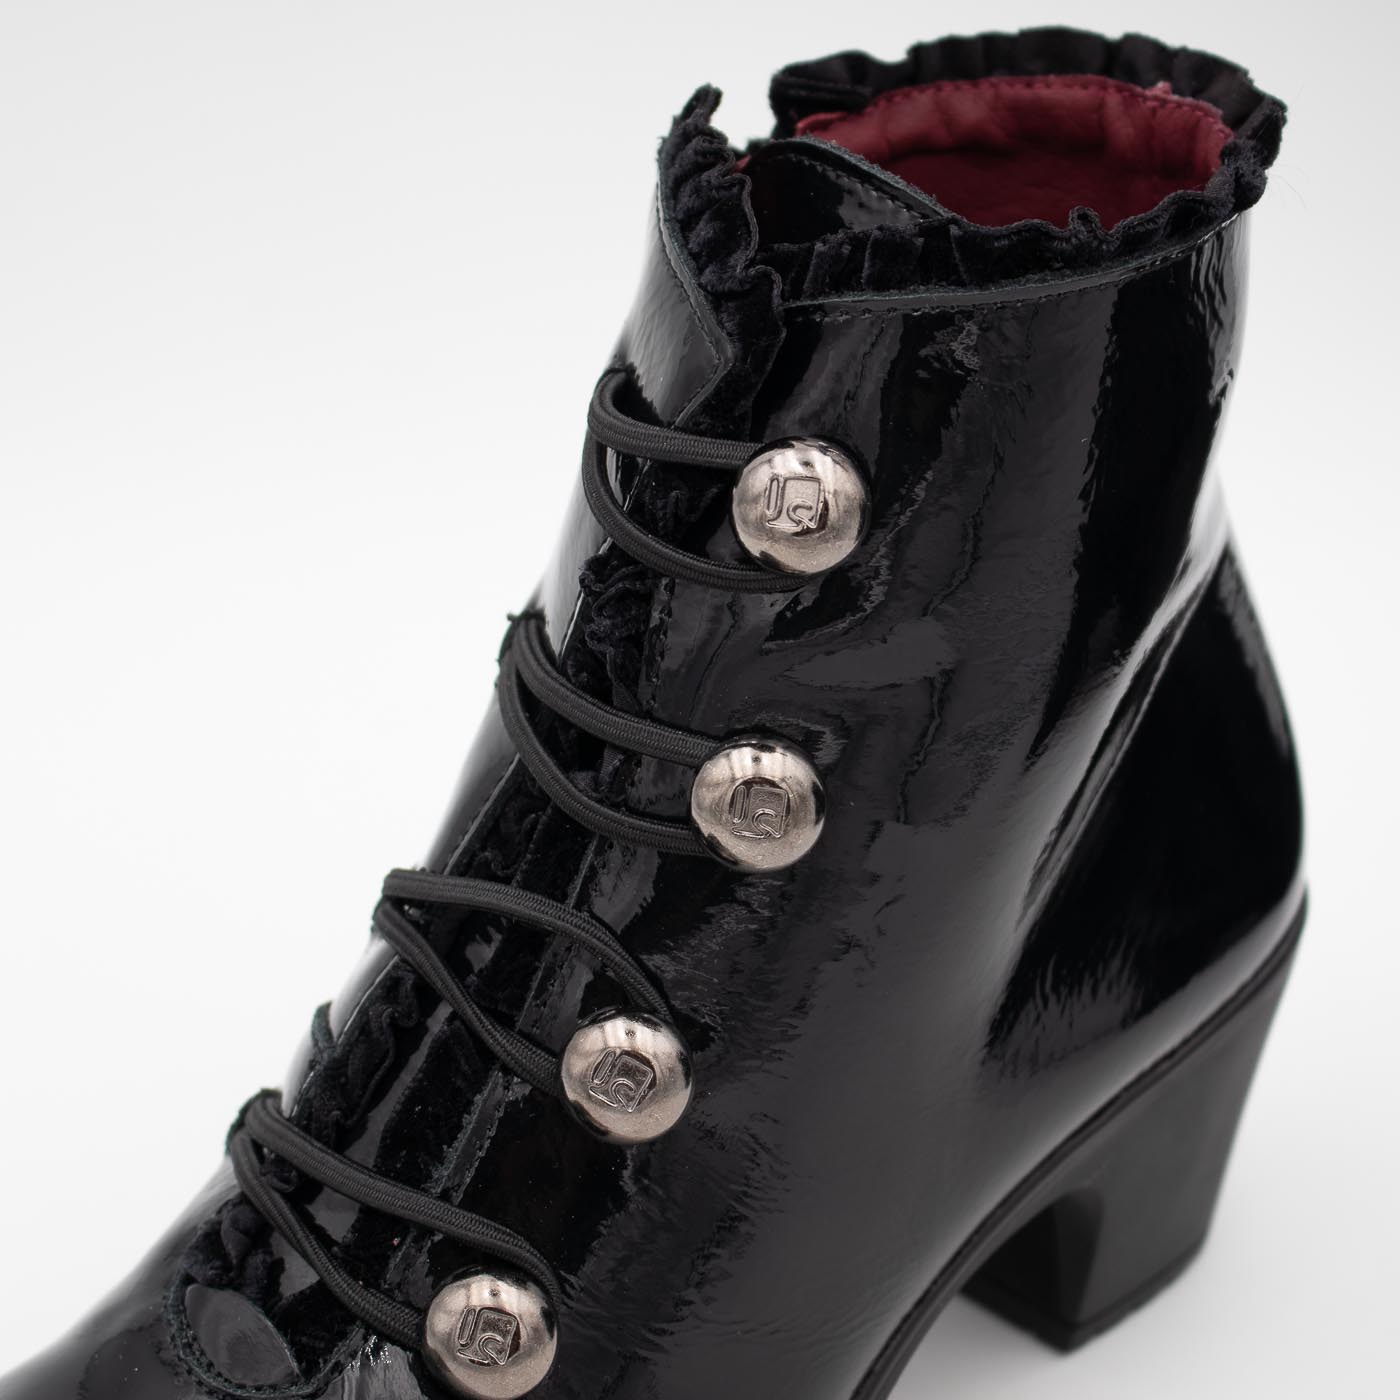 Main view of the Jose Saenz black ankle boot.